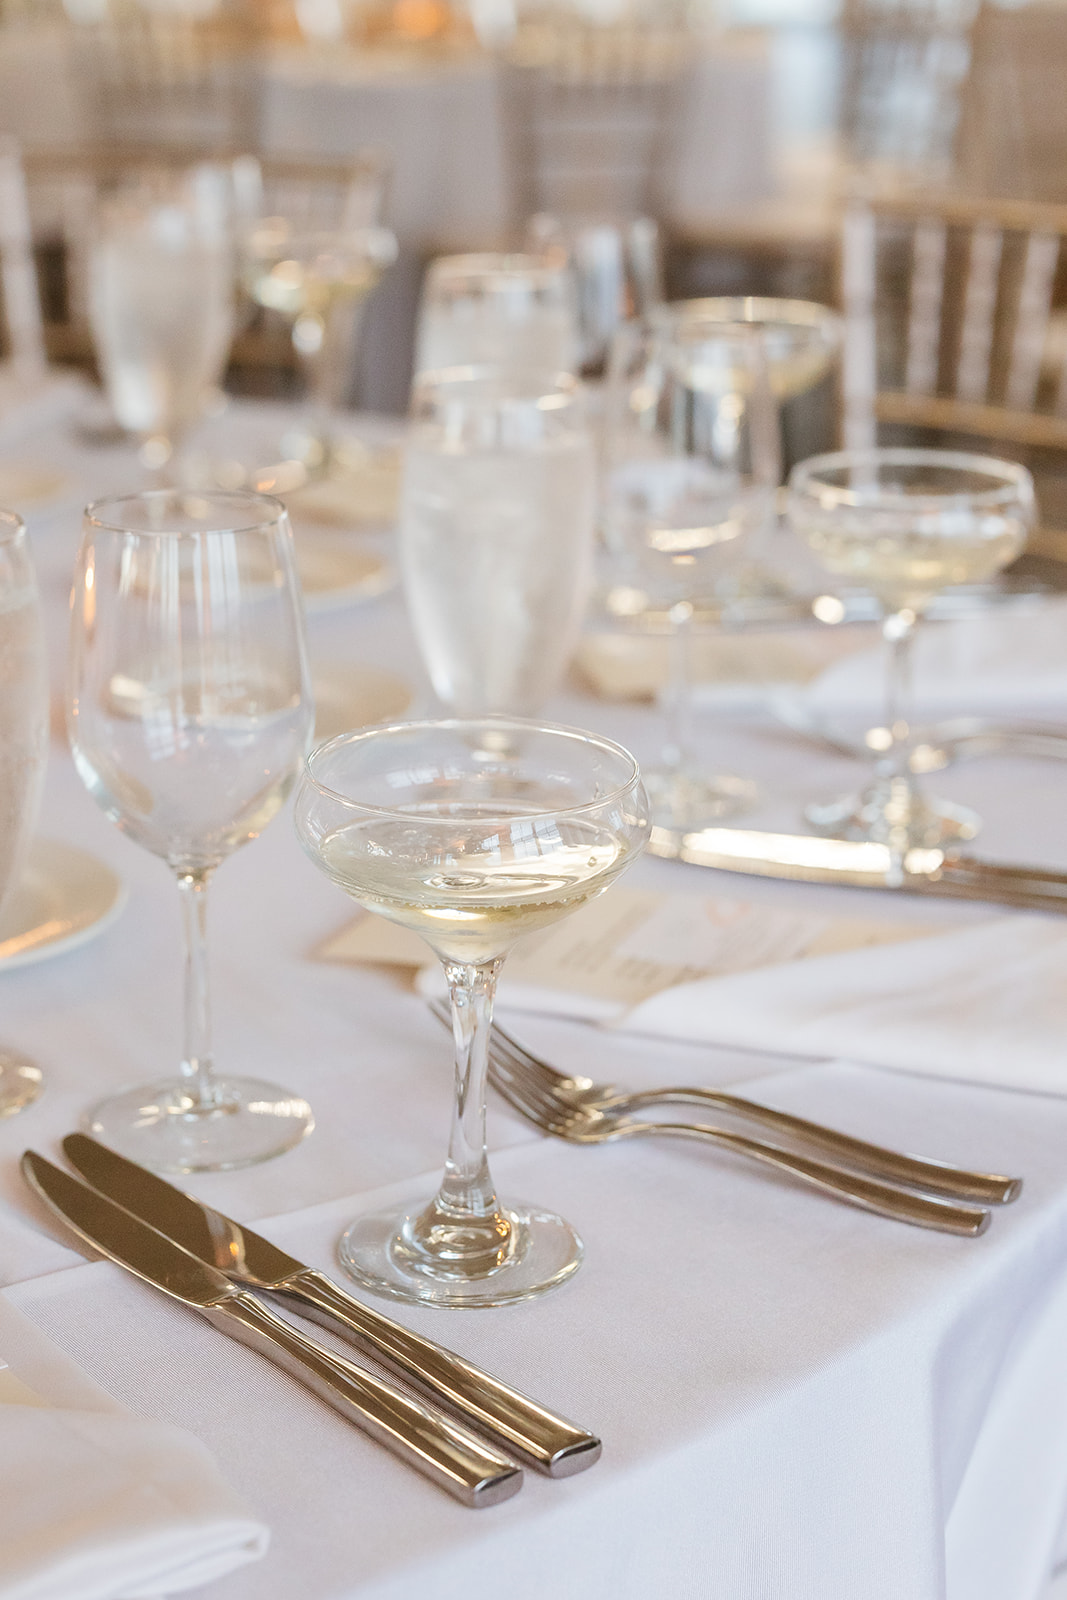 A table set with a white tablecloth and silverware, ready for a formal dining experience.